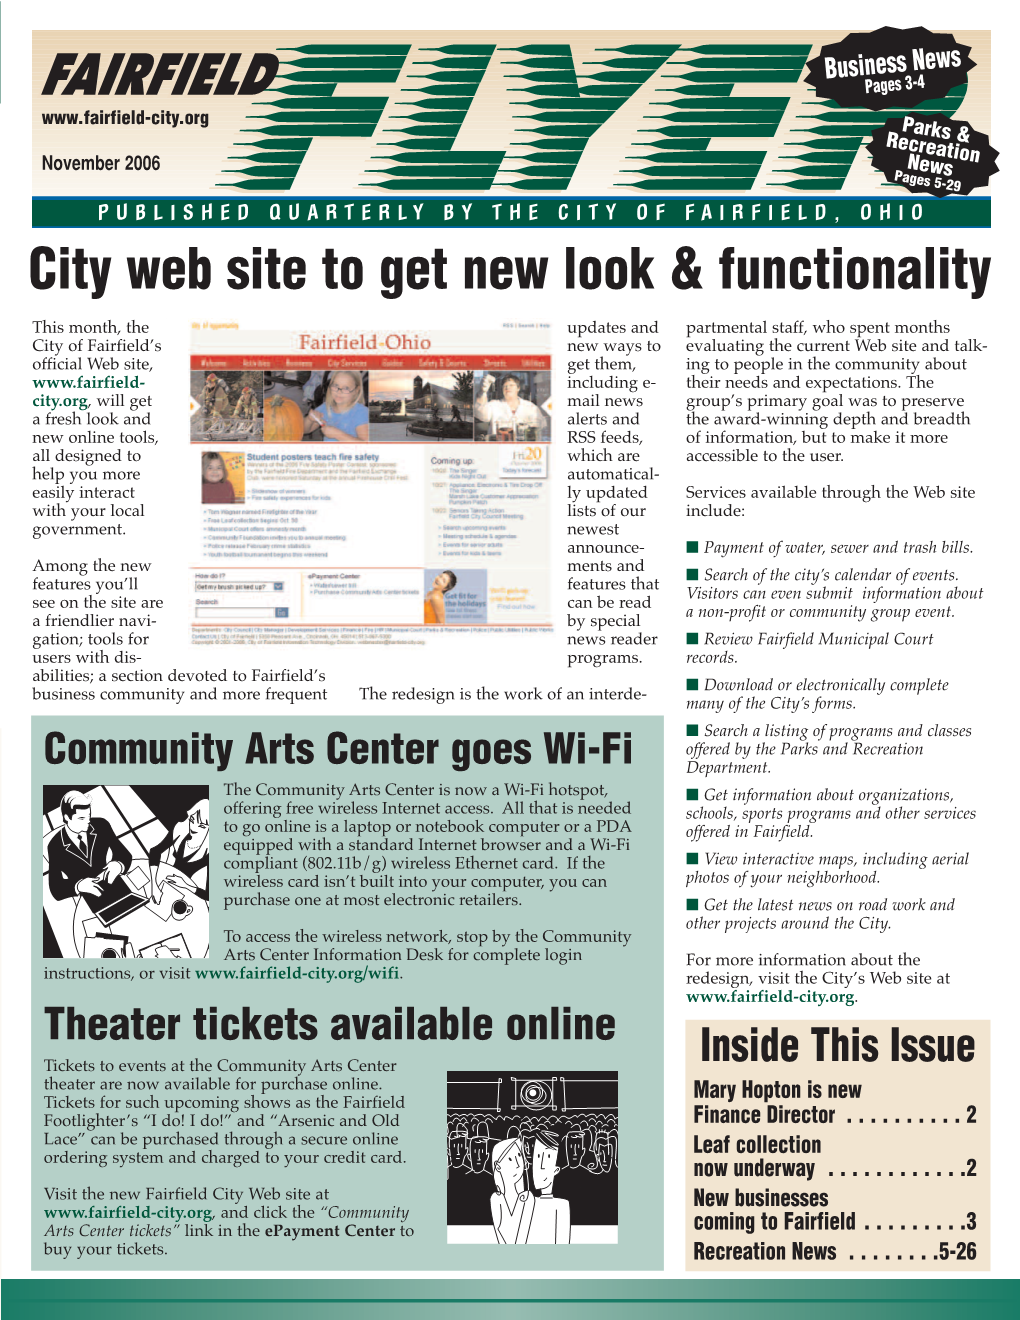 City Web Site to Get New Look & Functionality